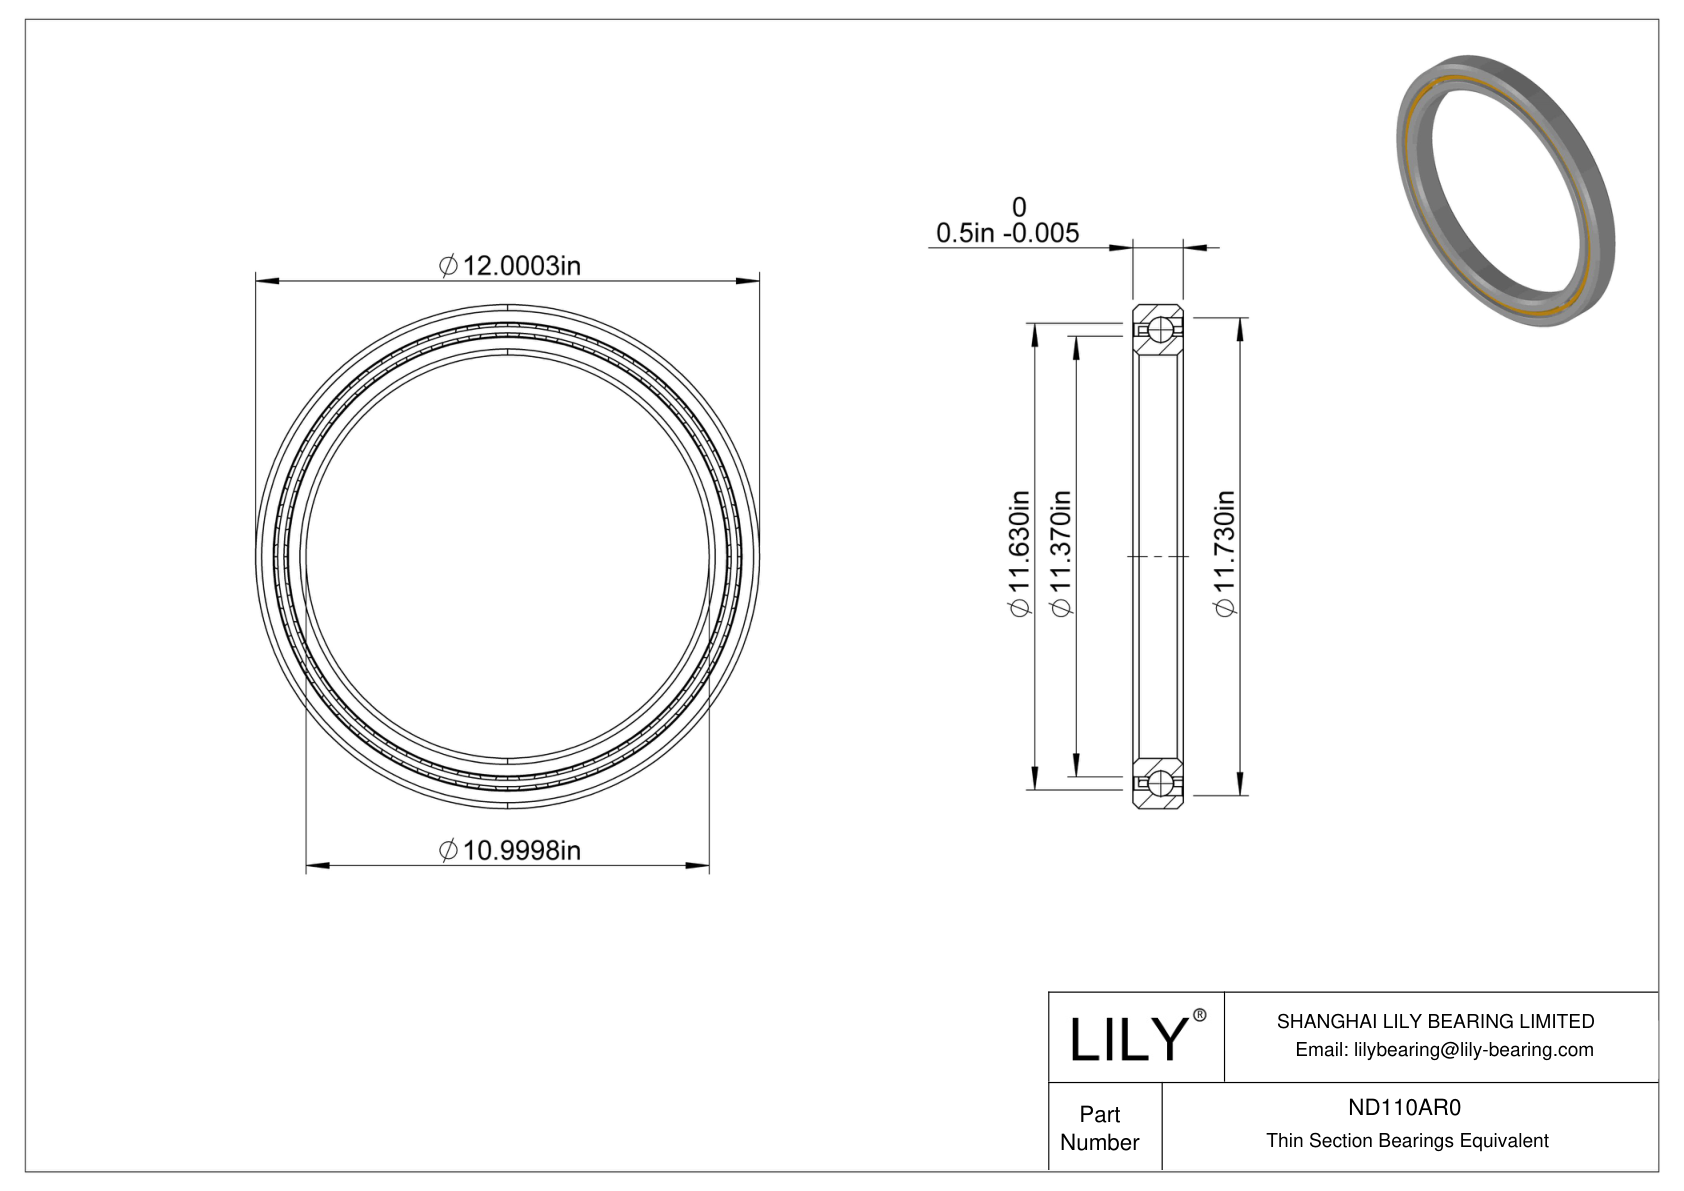 ND110AR0 Constant Section (CS) Bearings cad drawing